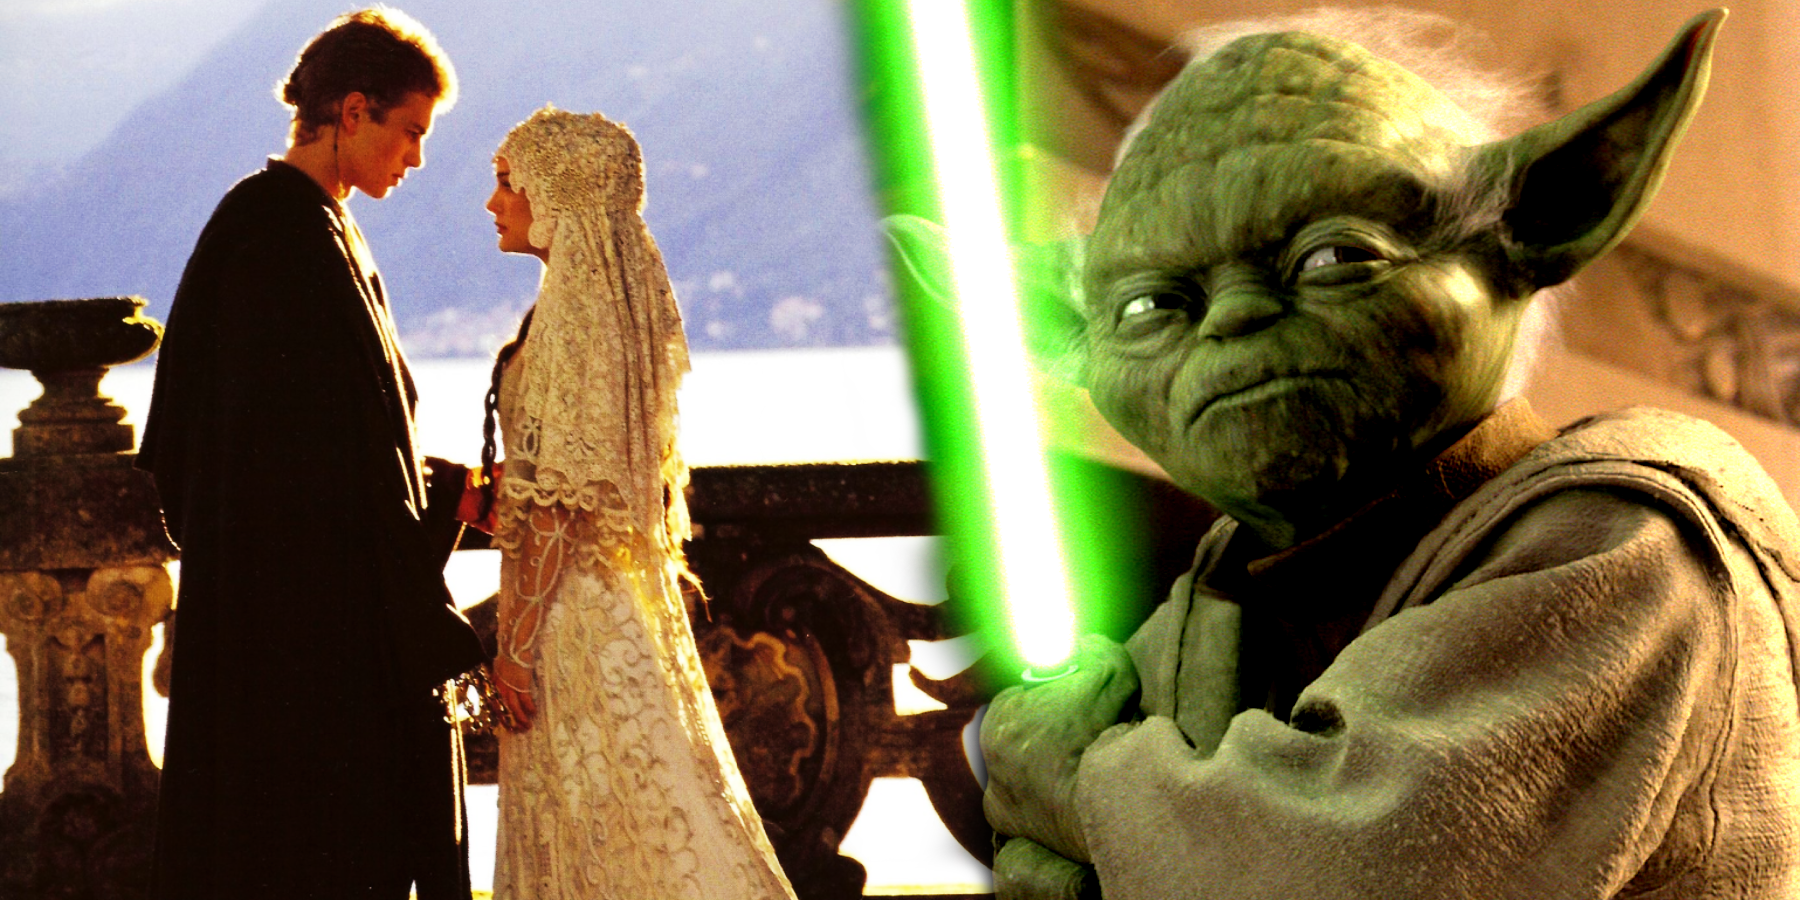 Anakin and Padme's wedding on the left, Yoda with his green ligthsaber on the right